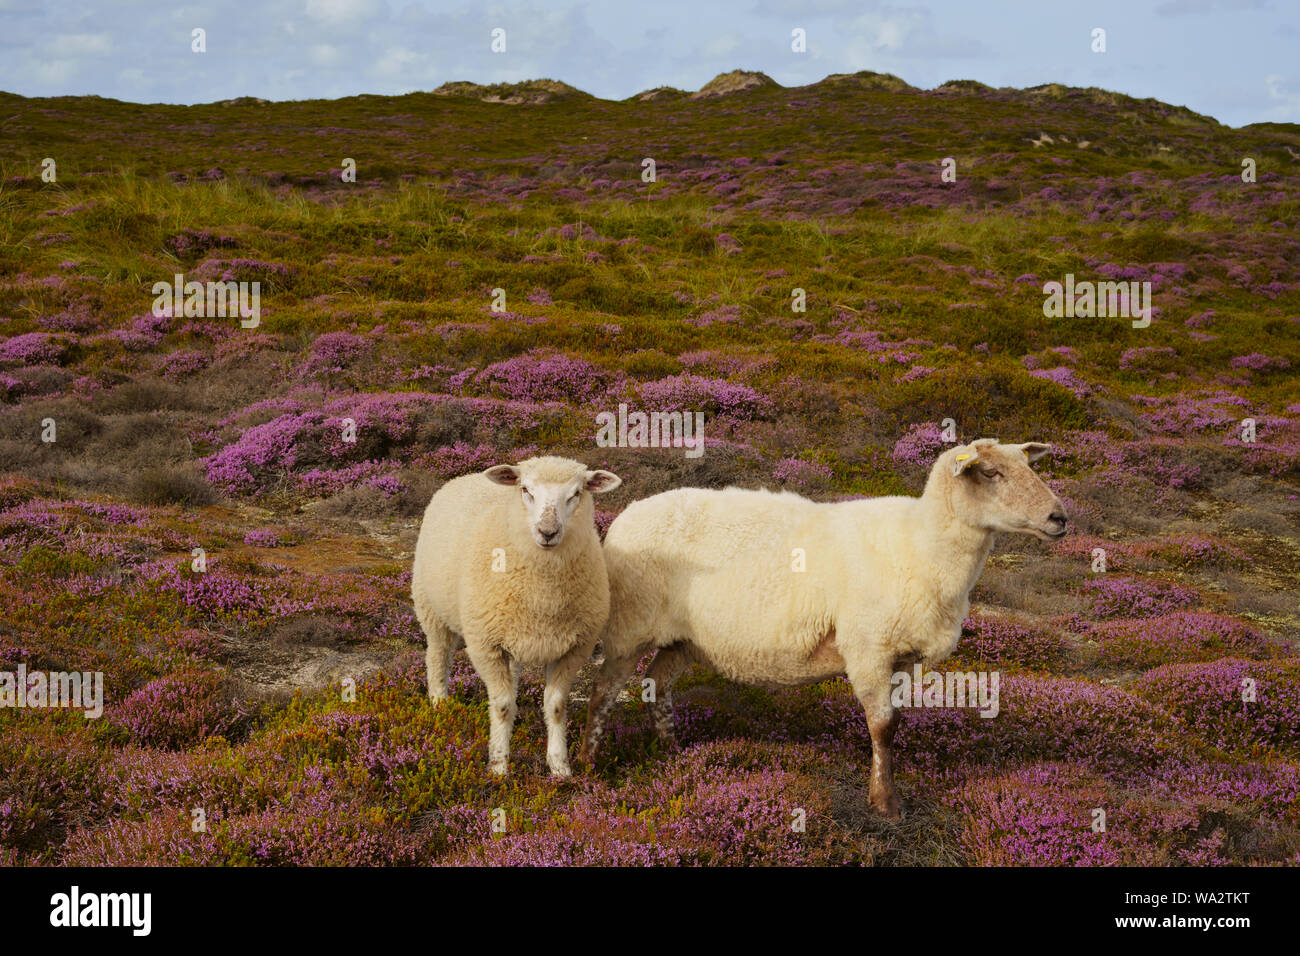 Two white sheep in the pink flowering heather. Idyllic late summer landscape on Sylt, North Sea island, Germany. Copy space. Stock Photo